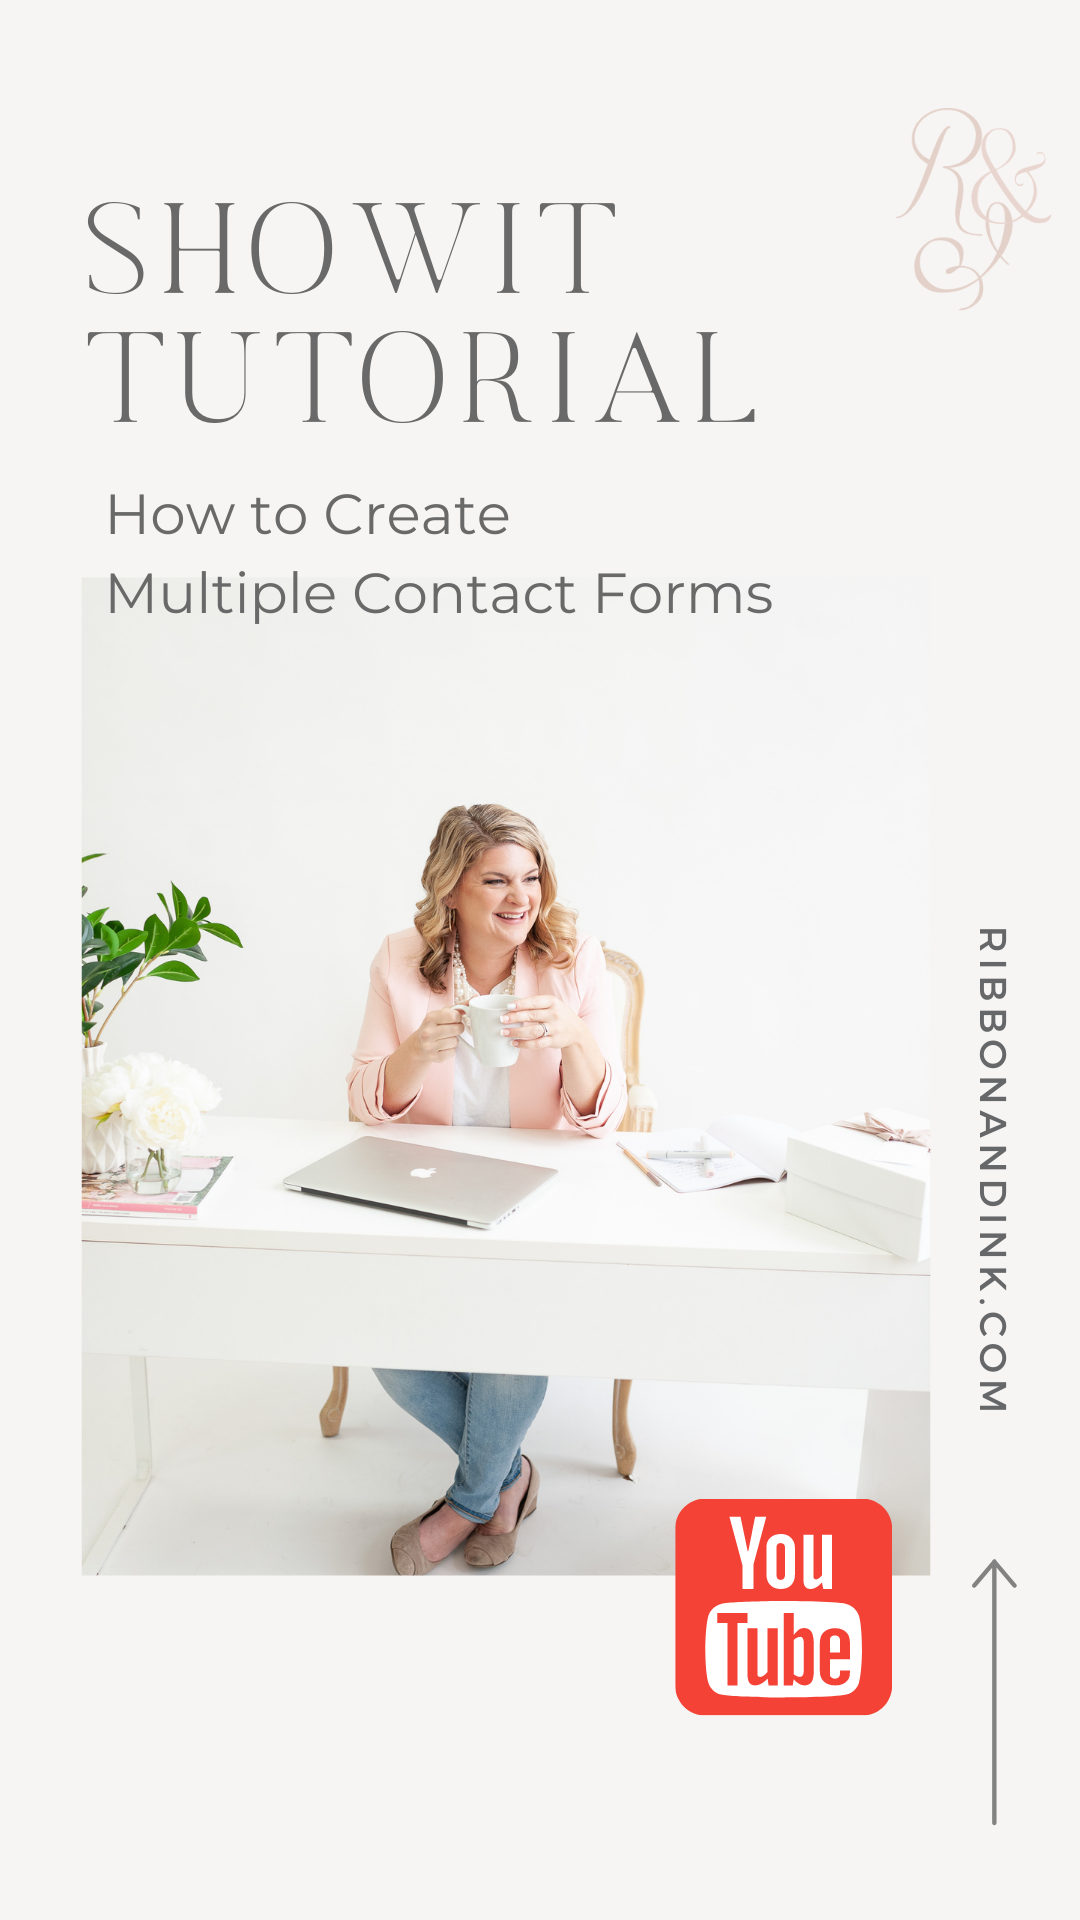 showit website tutorial / how to create multiple contact forms